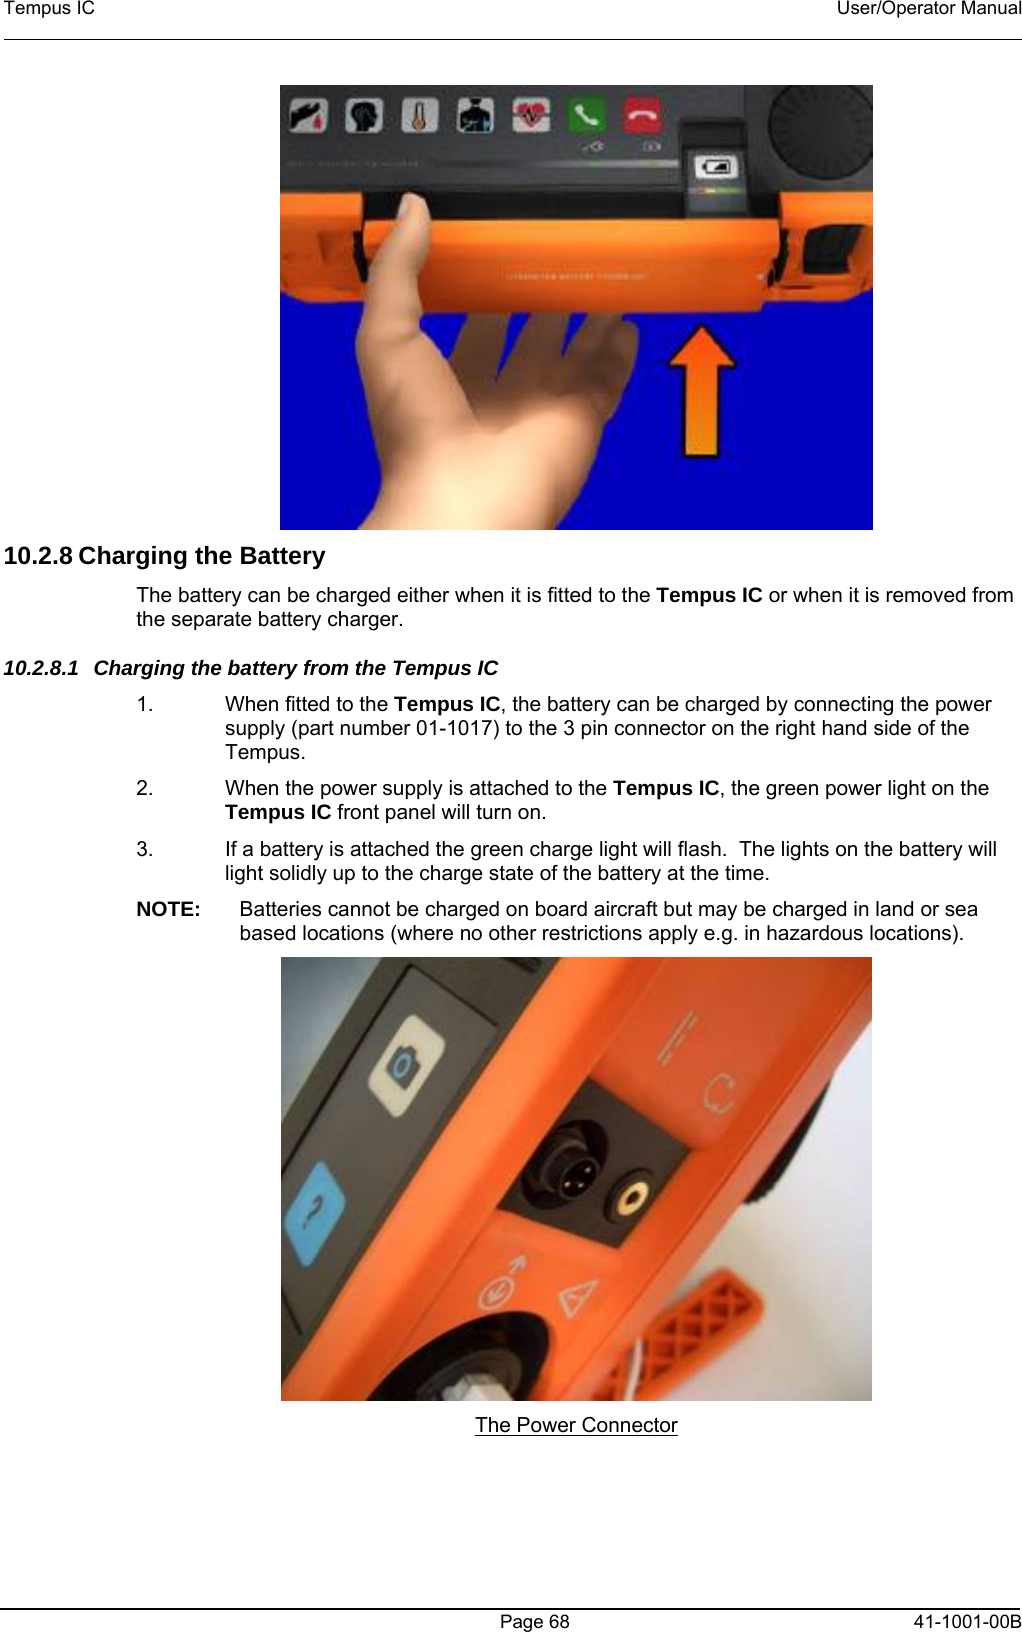 Tempus IC    User/Operator Manual     10.2.8 Charging the Battery The battery can be charged either when it is fitted to the Tempus IC or when it is removed from the separate battery charger. 10.2.8.1  Charging the battery from the Tempus IC 1.  When fitted to the Tempus IC, the battery can be charged by connecting the power supply (part number 01-1017) to the 3 pin connector on the right hand side of the Tempus. 2.  When the power supply is attached to the Tempus IC, the green power light on the Tempus IC front panel will turn on.  3.  If a battery is attached the green charge light will flash.  The lights on the battery will light solidly up to the charge state of the battery at the time. NOTE:  Batteries cannot be charged on board aircraft but may be charged in land or sea based locations (where no other restrictions apply e.g. in hazardous locations).  The Power Connector   Page 68   41-1001-00B 